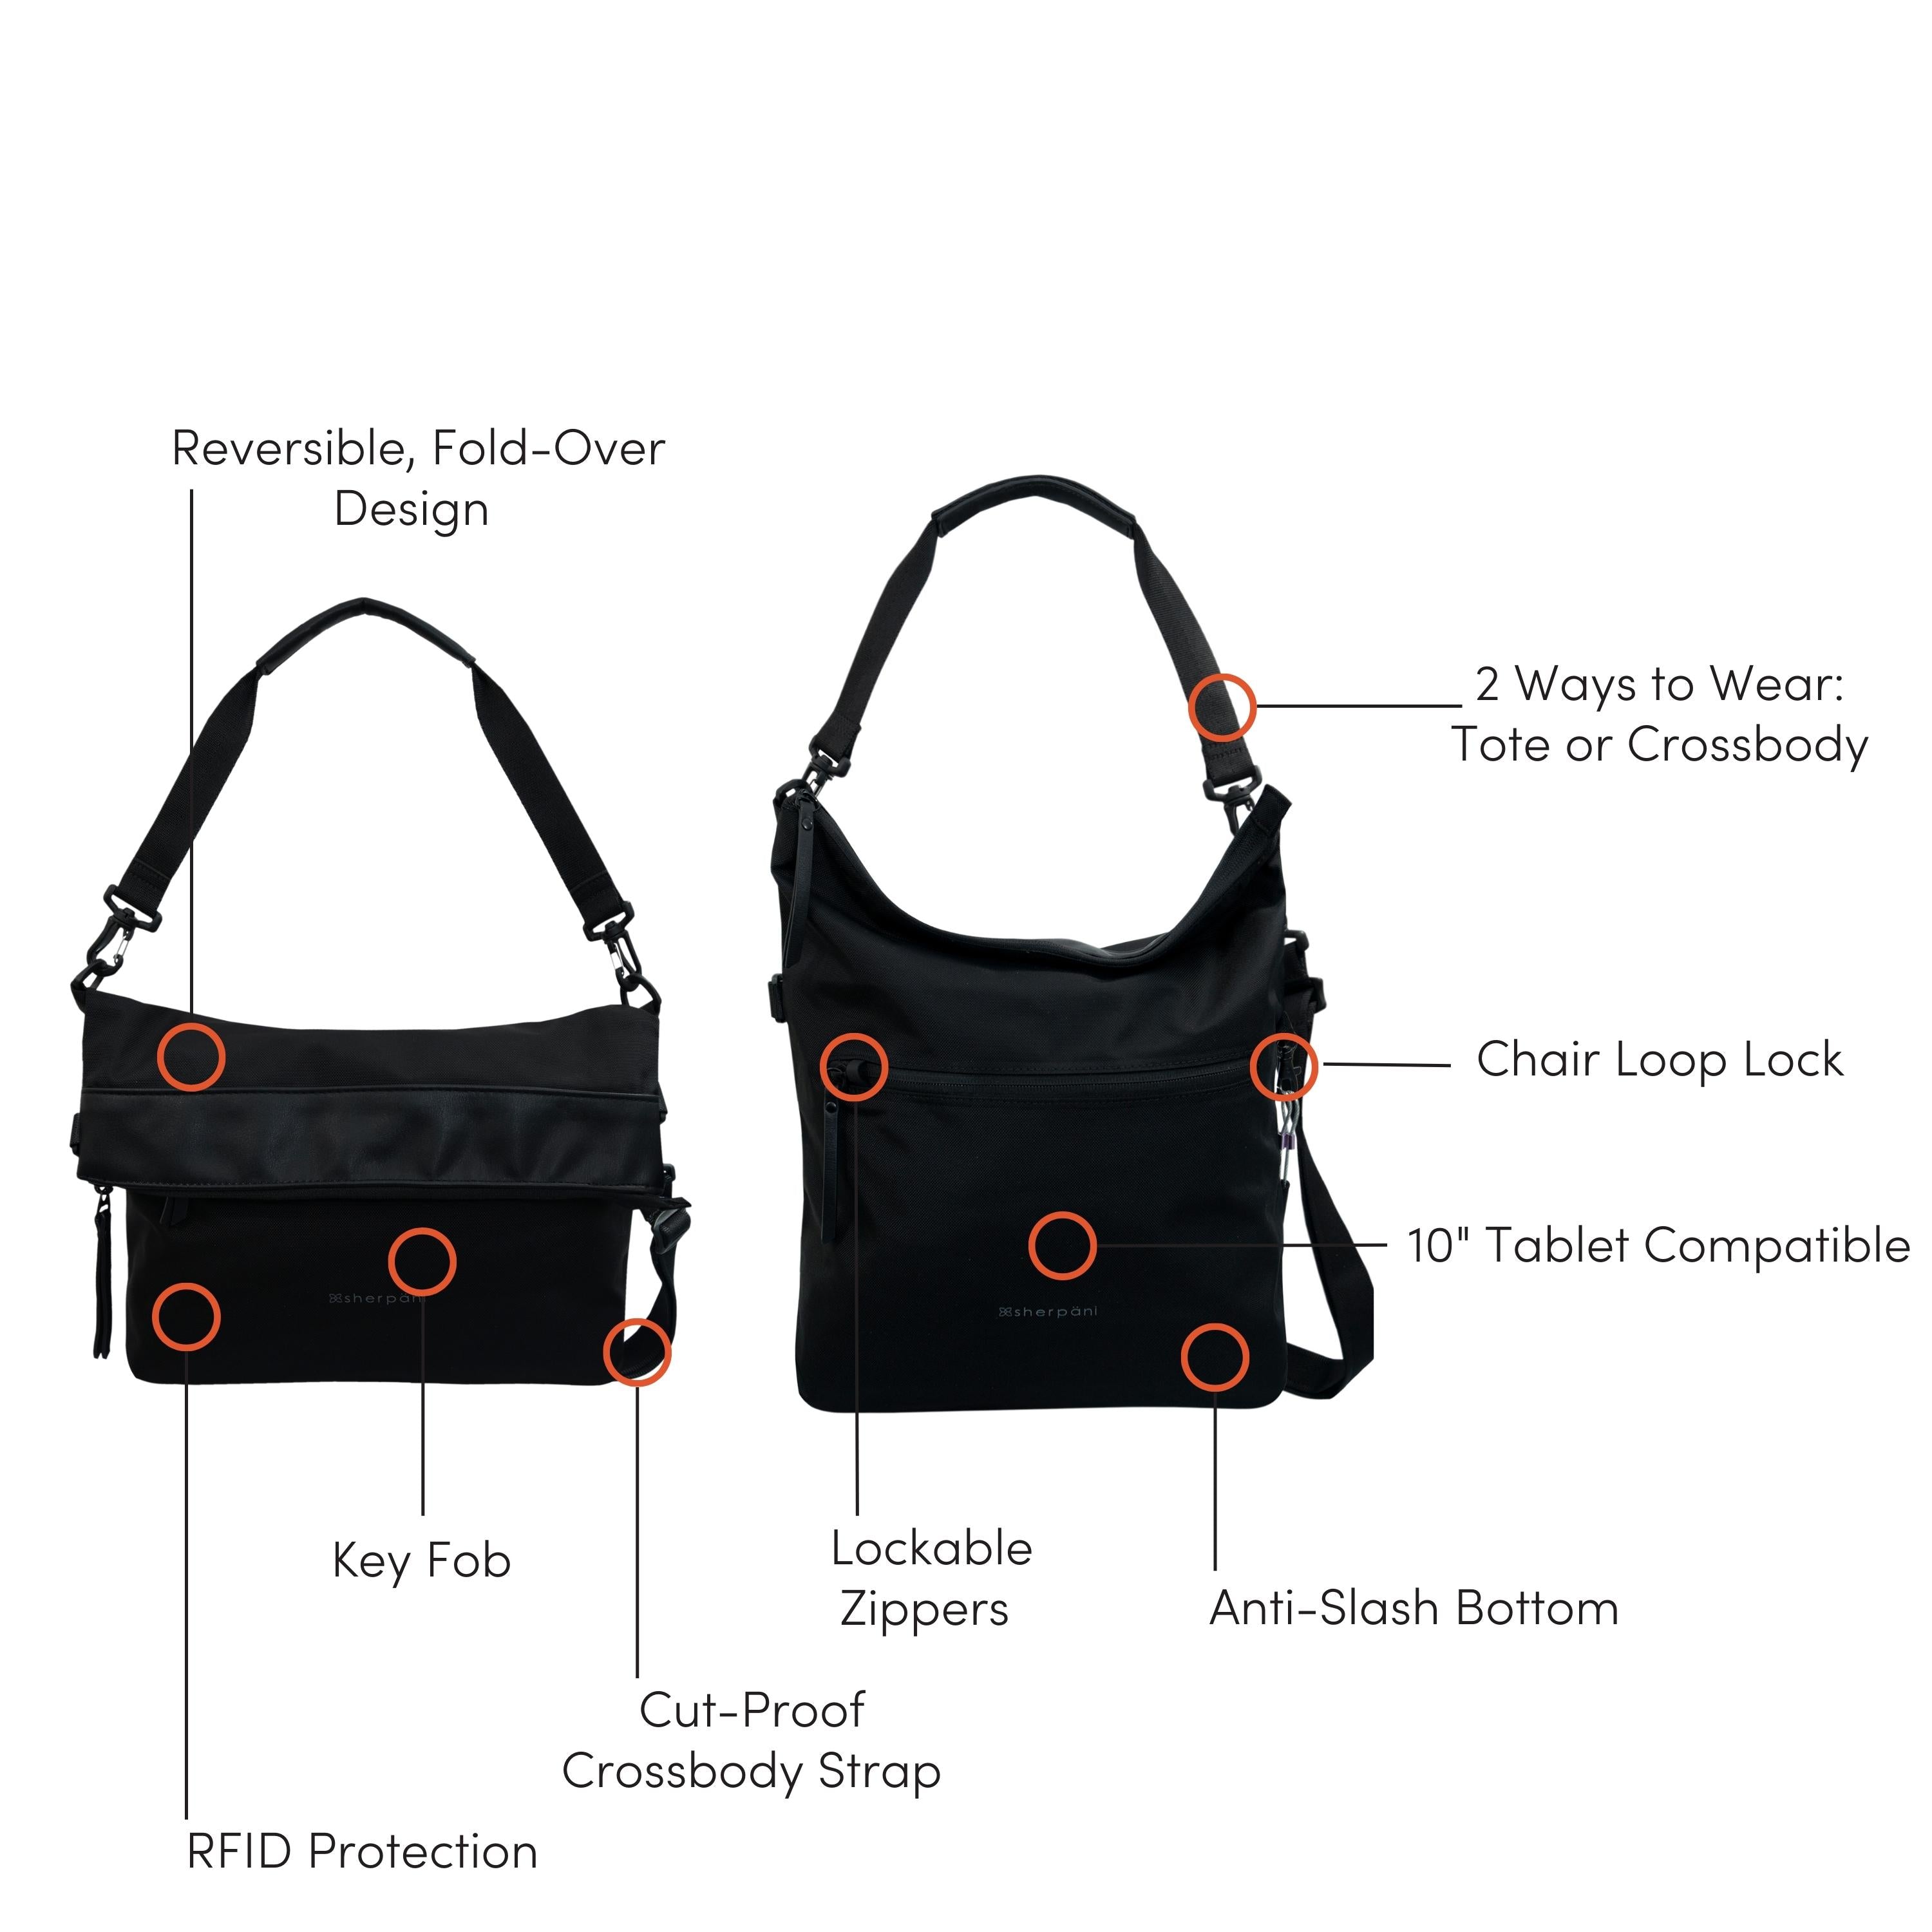 We have designed 2 styles of bag organisers for the Loop Hobo